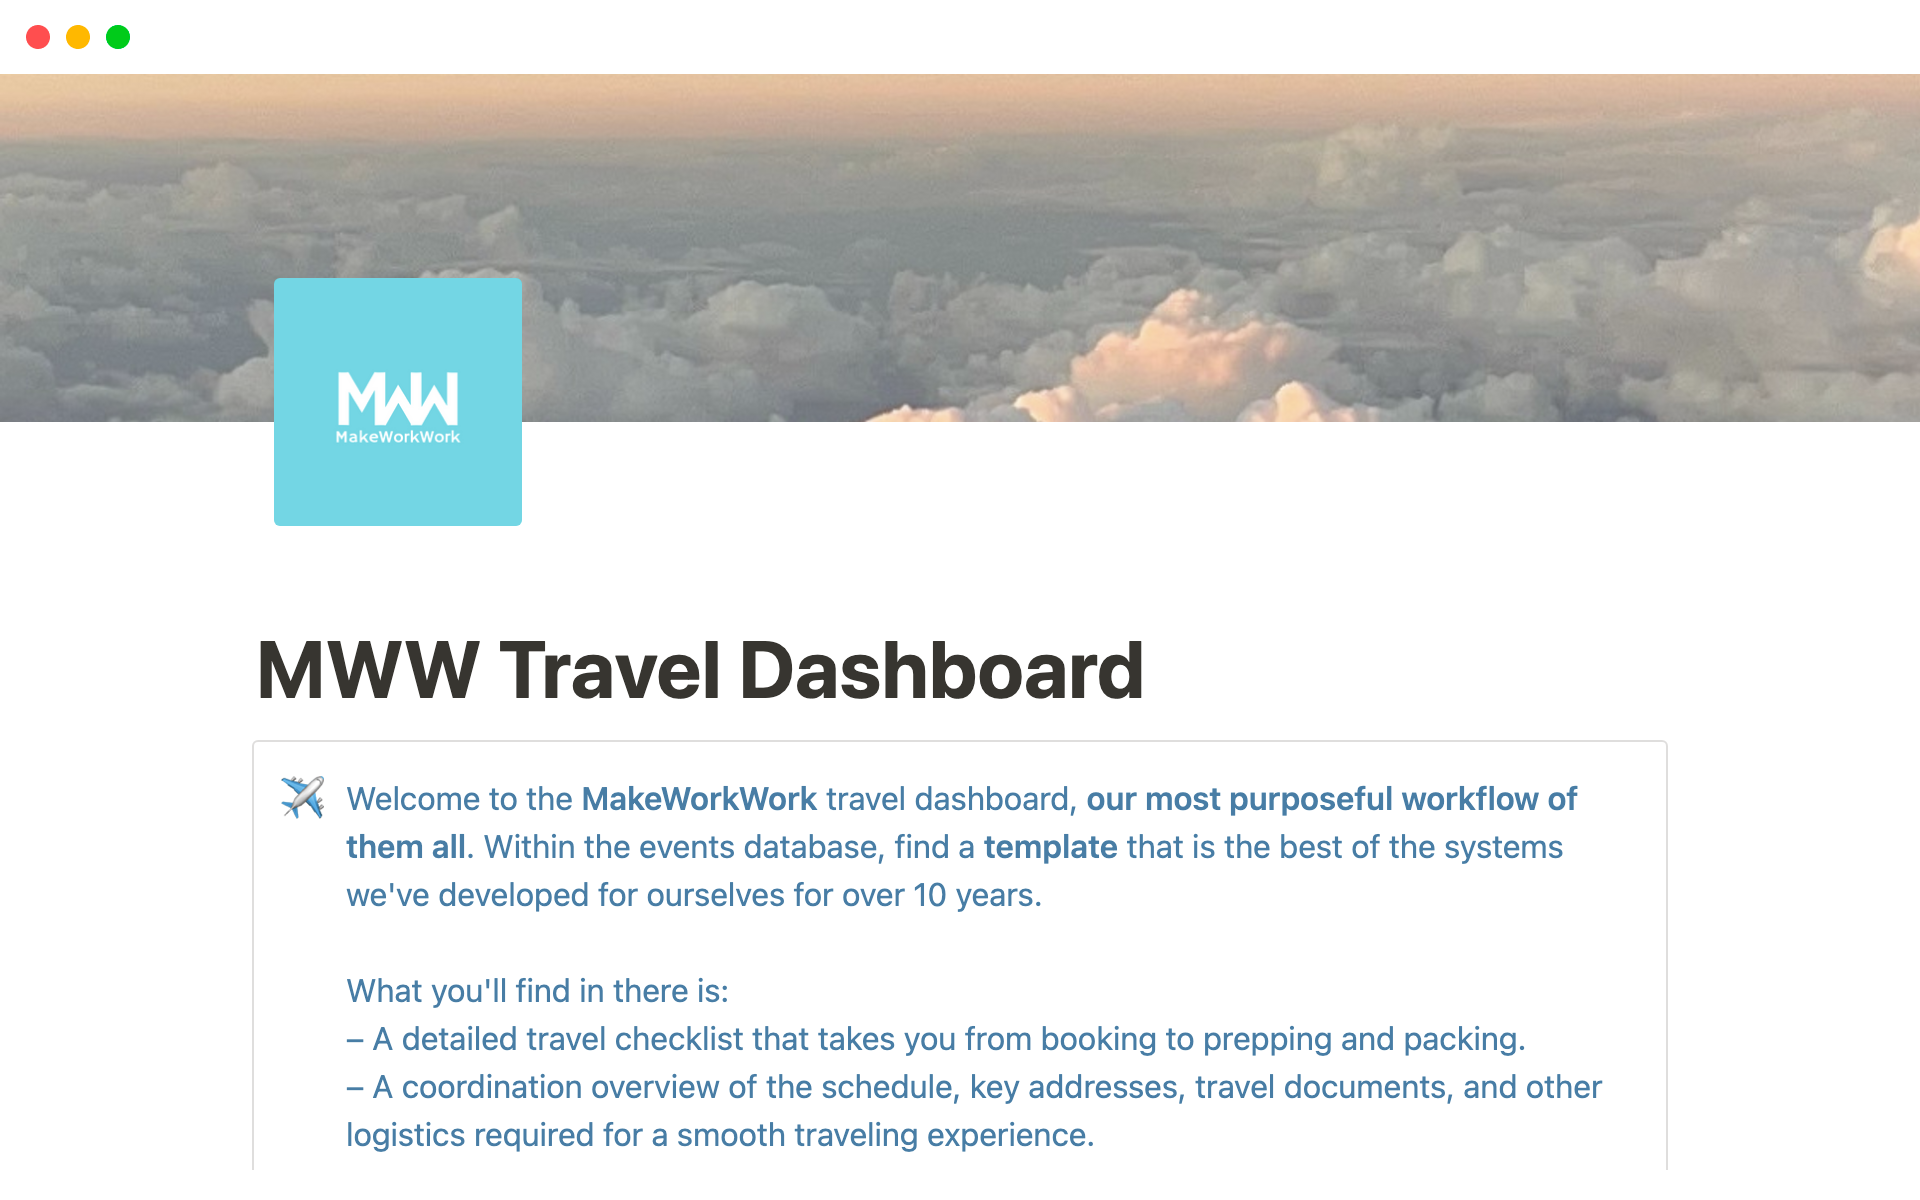 The MakeWorkWork Travel Dashboard includes a detailed travel checklist as well as an overview of the schedule, key addresses, travel documents, and other logistics required for a smooth travel.